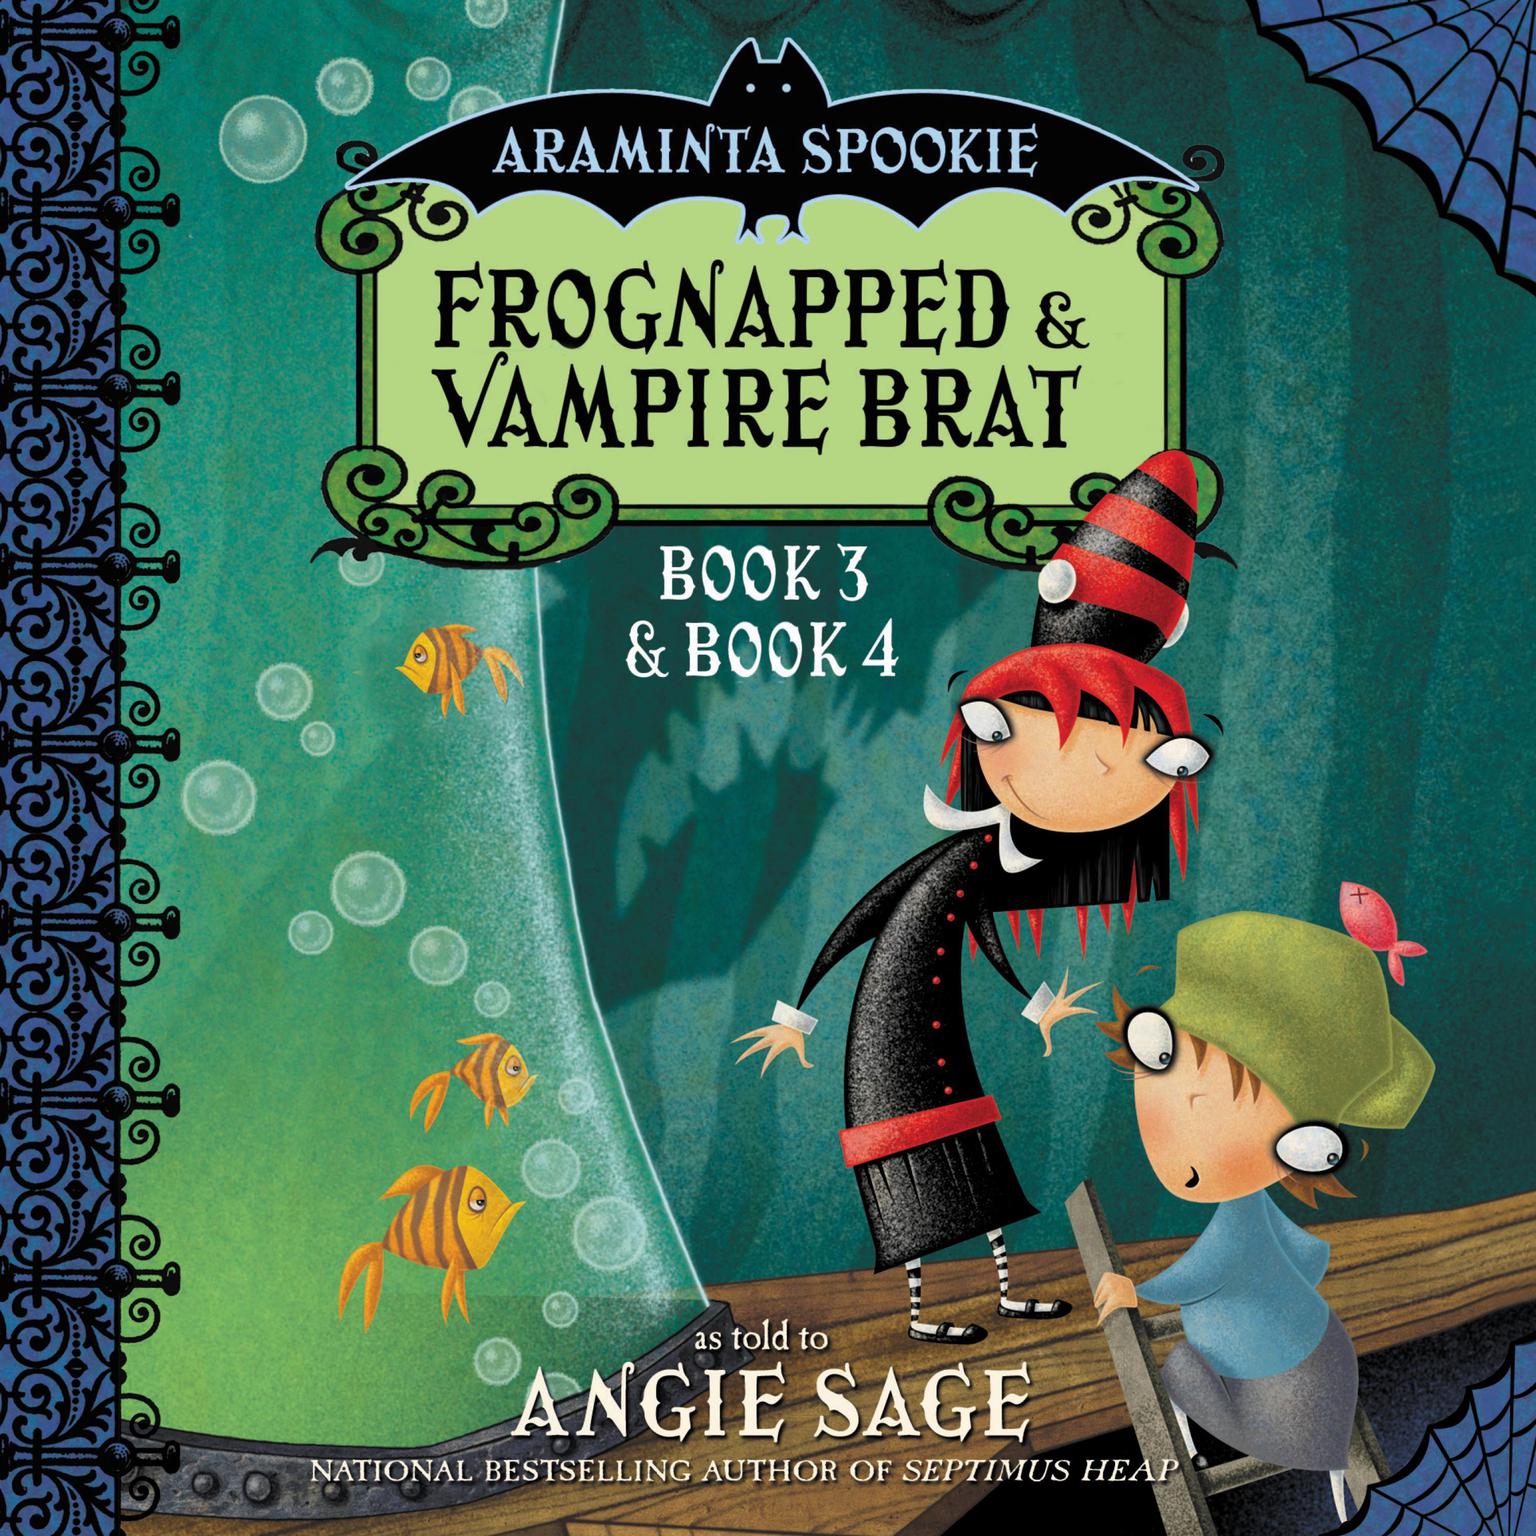 Araminta Spookie Vol. 2: Frognapped and Vampire Brat Audiobook, by Angie Sage